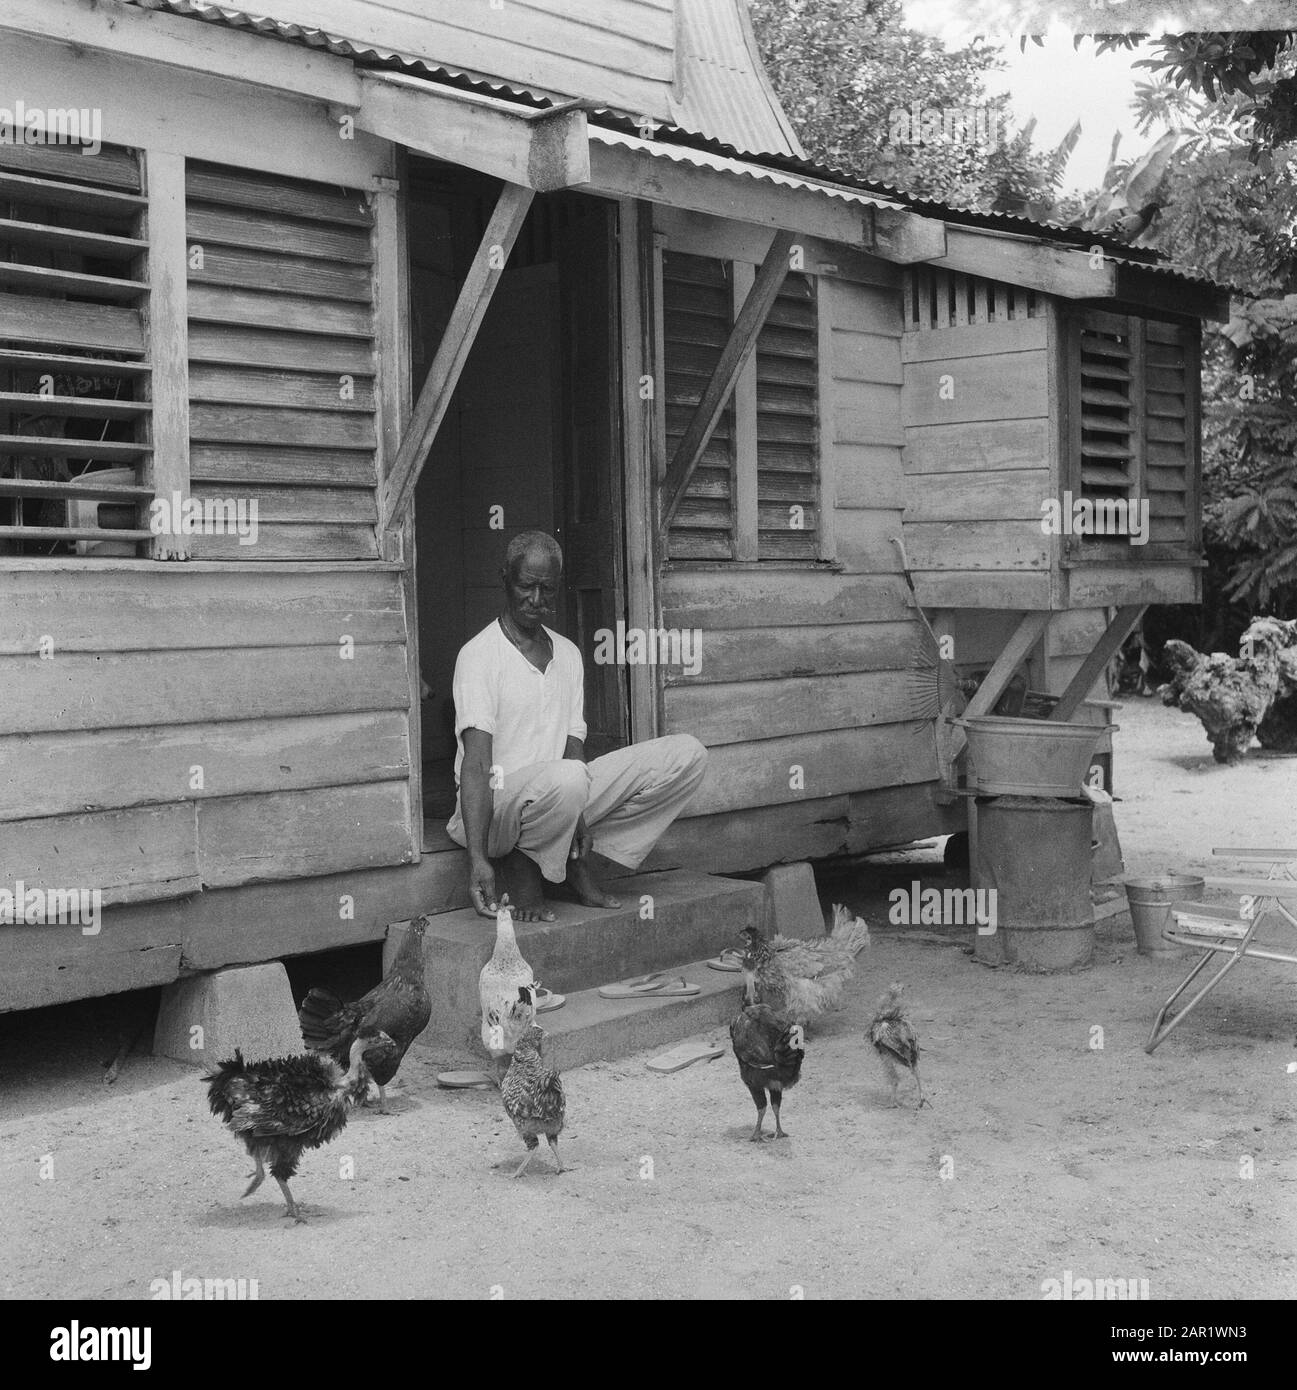 Suriname, Surinamer for his house with chickens Date: May 31, 1967 Location: Suriname Keywords: KIPHN, houses Stock Photo